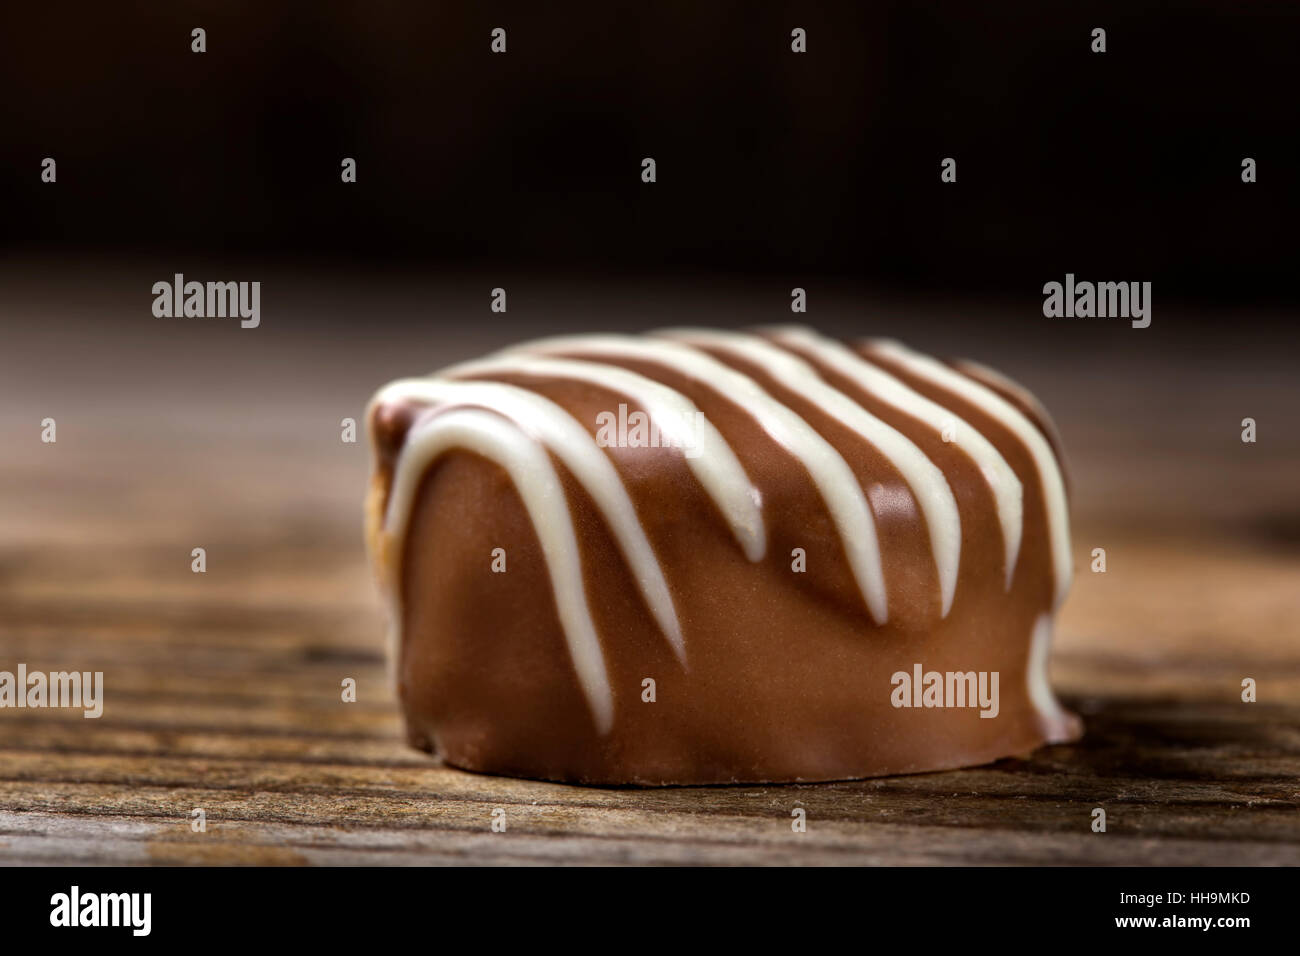 Close up of one chocolate candy over wooden background Stock Photo